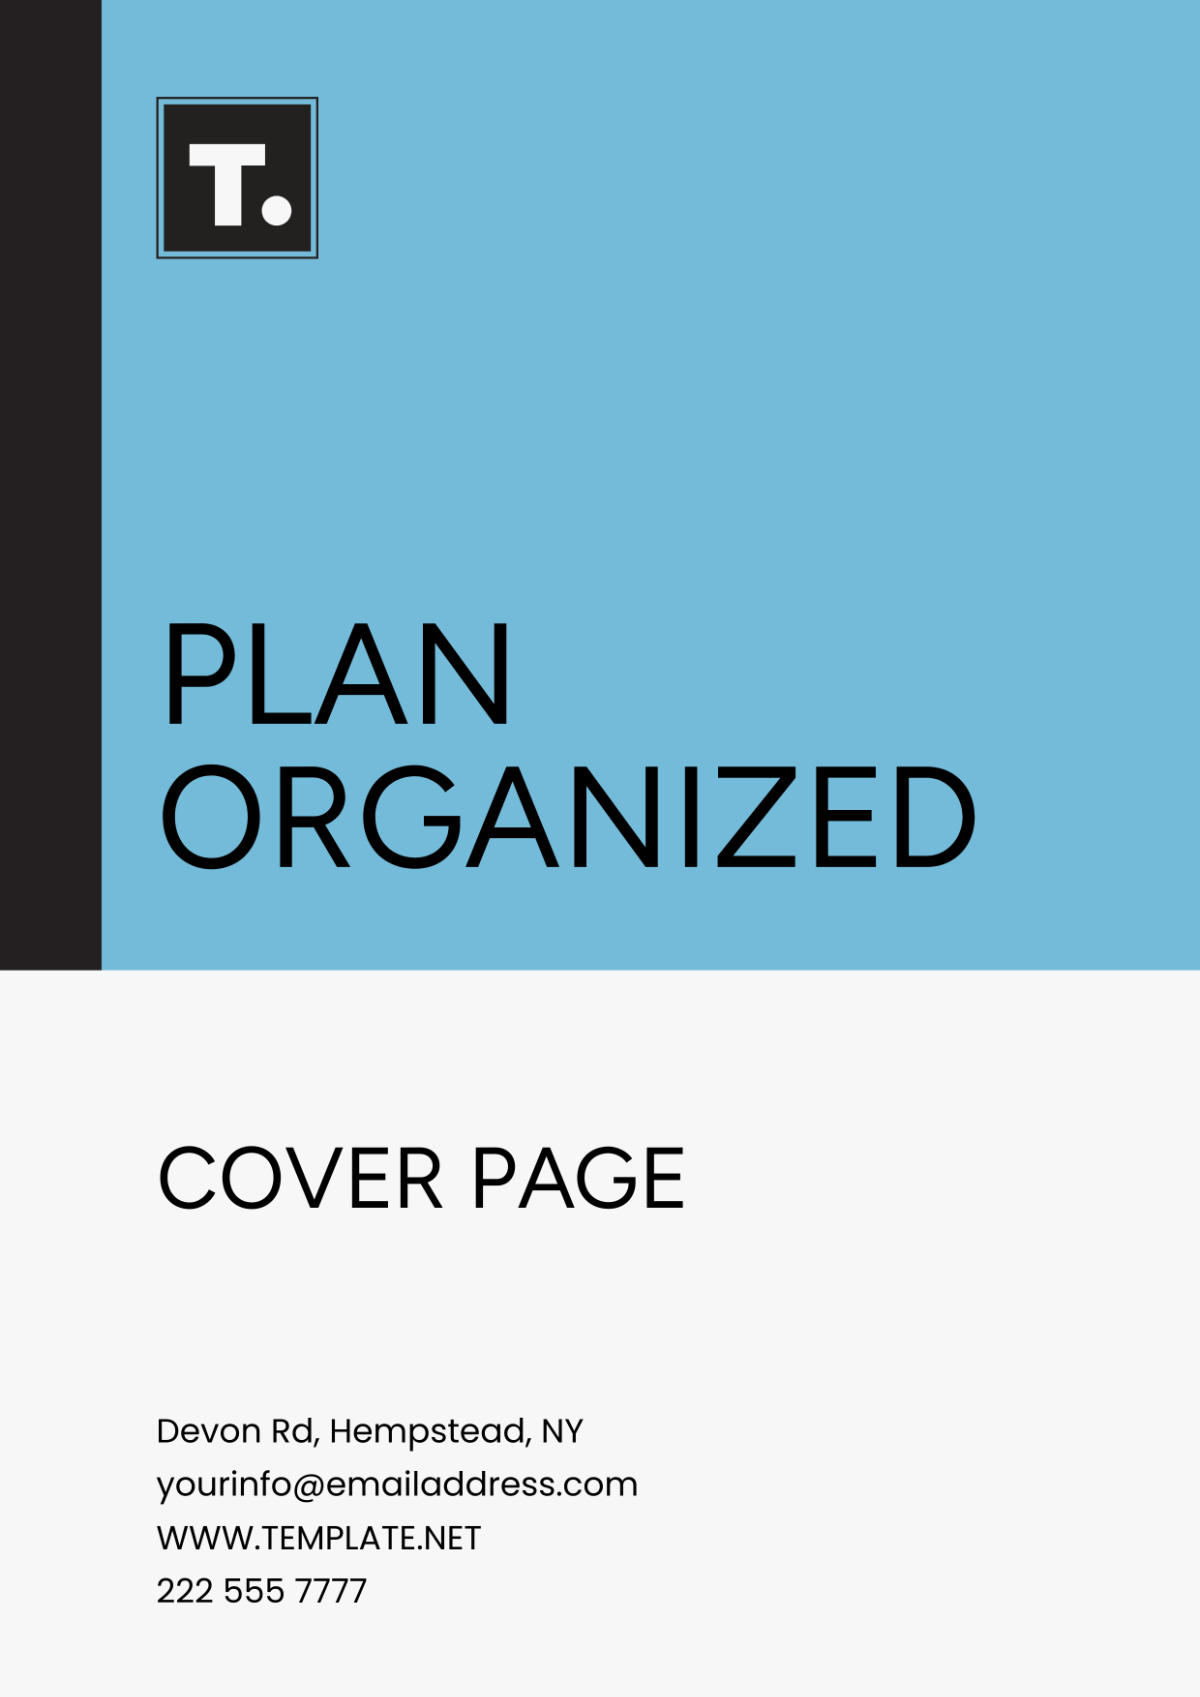 Plan Organized Cover Page